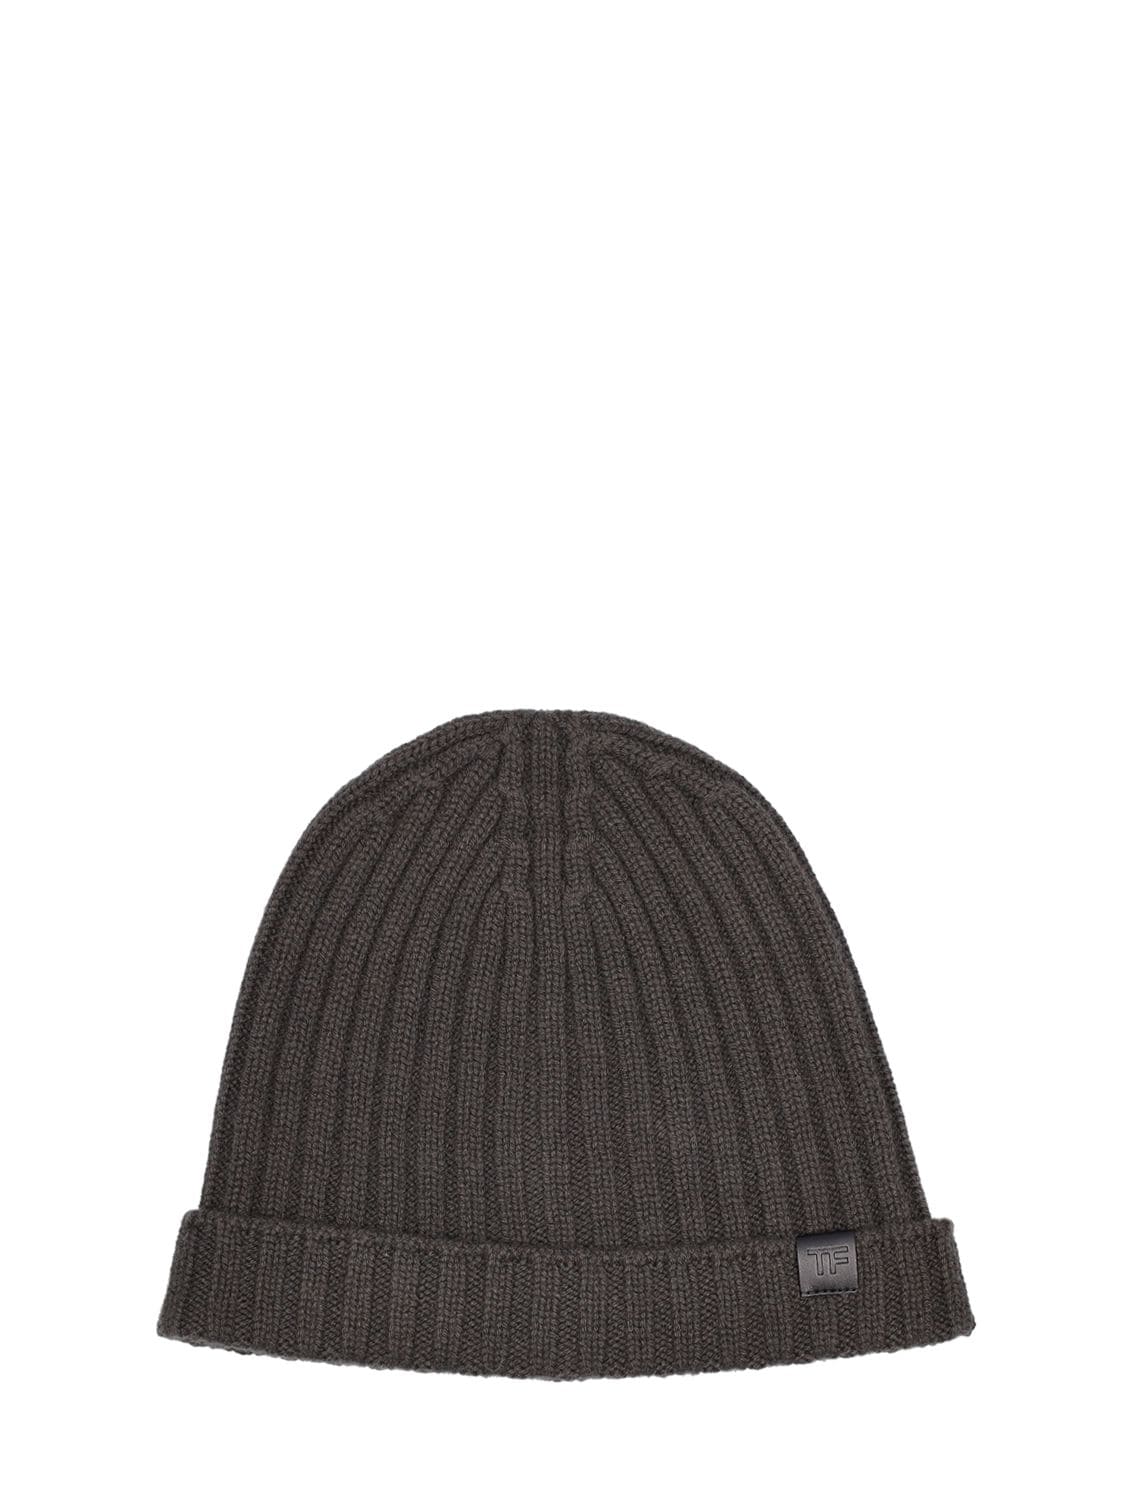 TOM FORD Cashmere Ribbed Beanie Hat